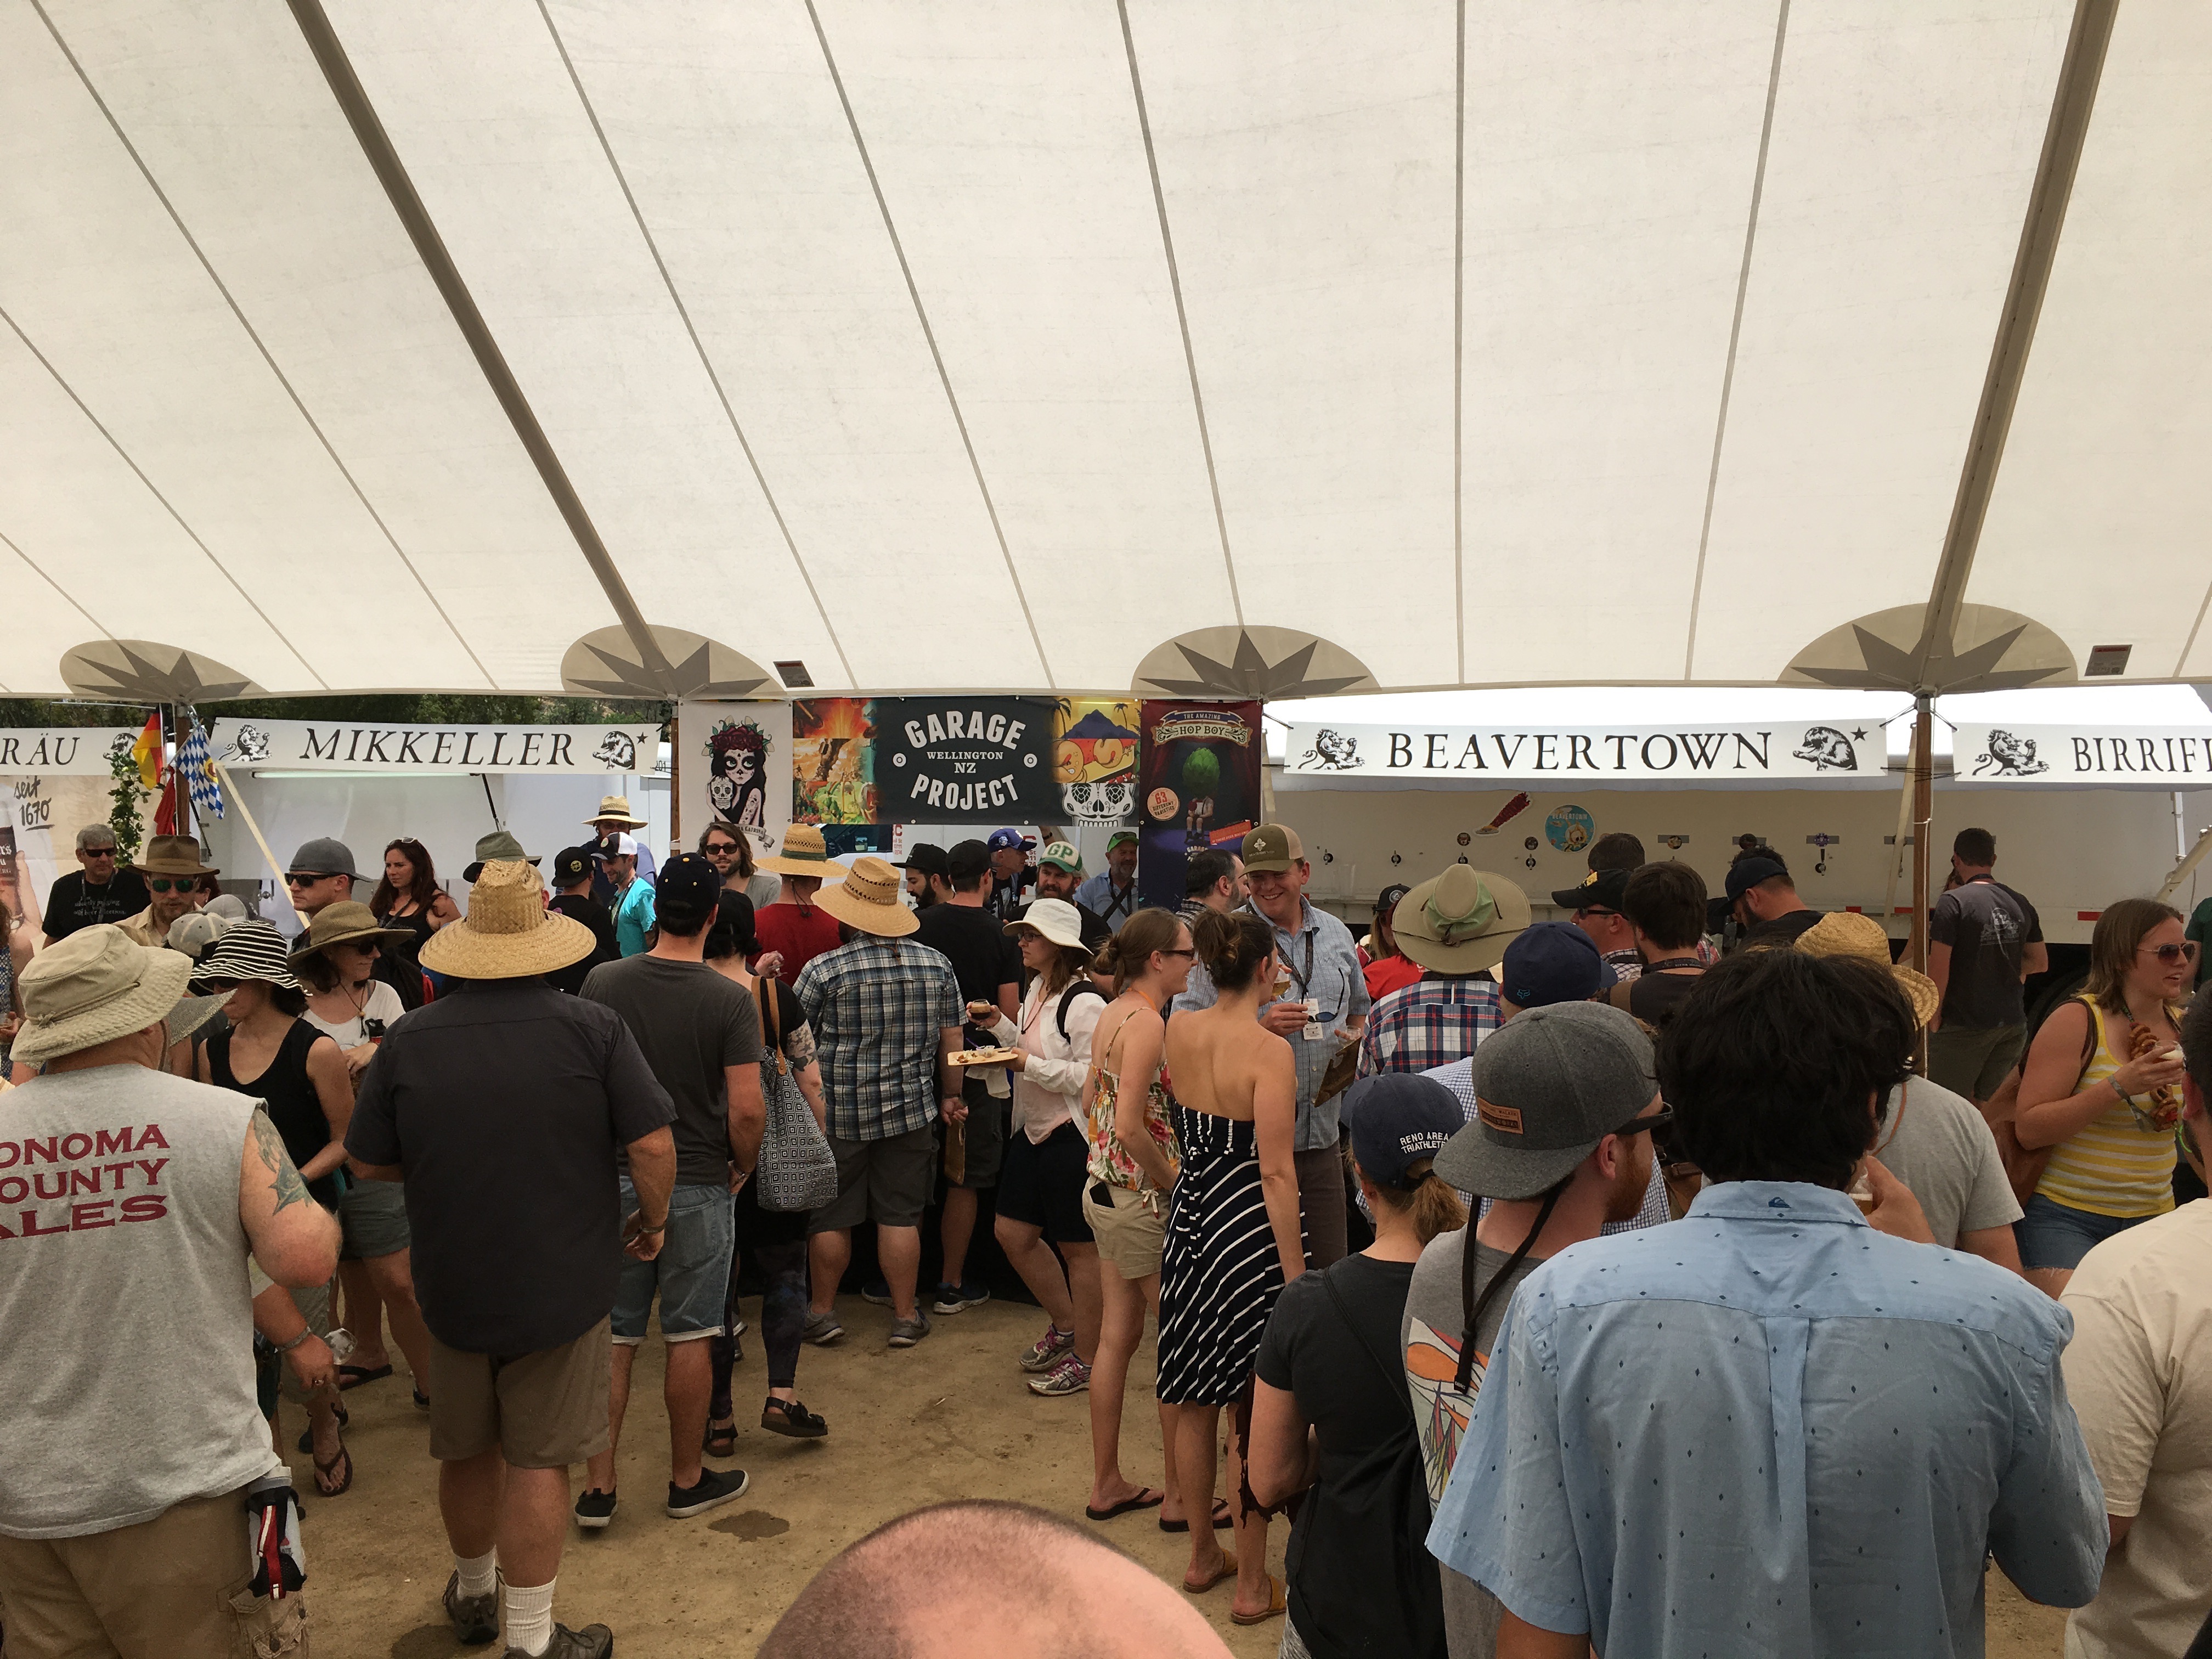 The line for Garage Project at the 2016 Firestone Walker Invitational Beer Fest goes on forever. Its Cherry Bomb was what kept this line continually long.